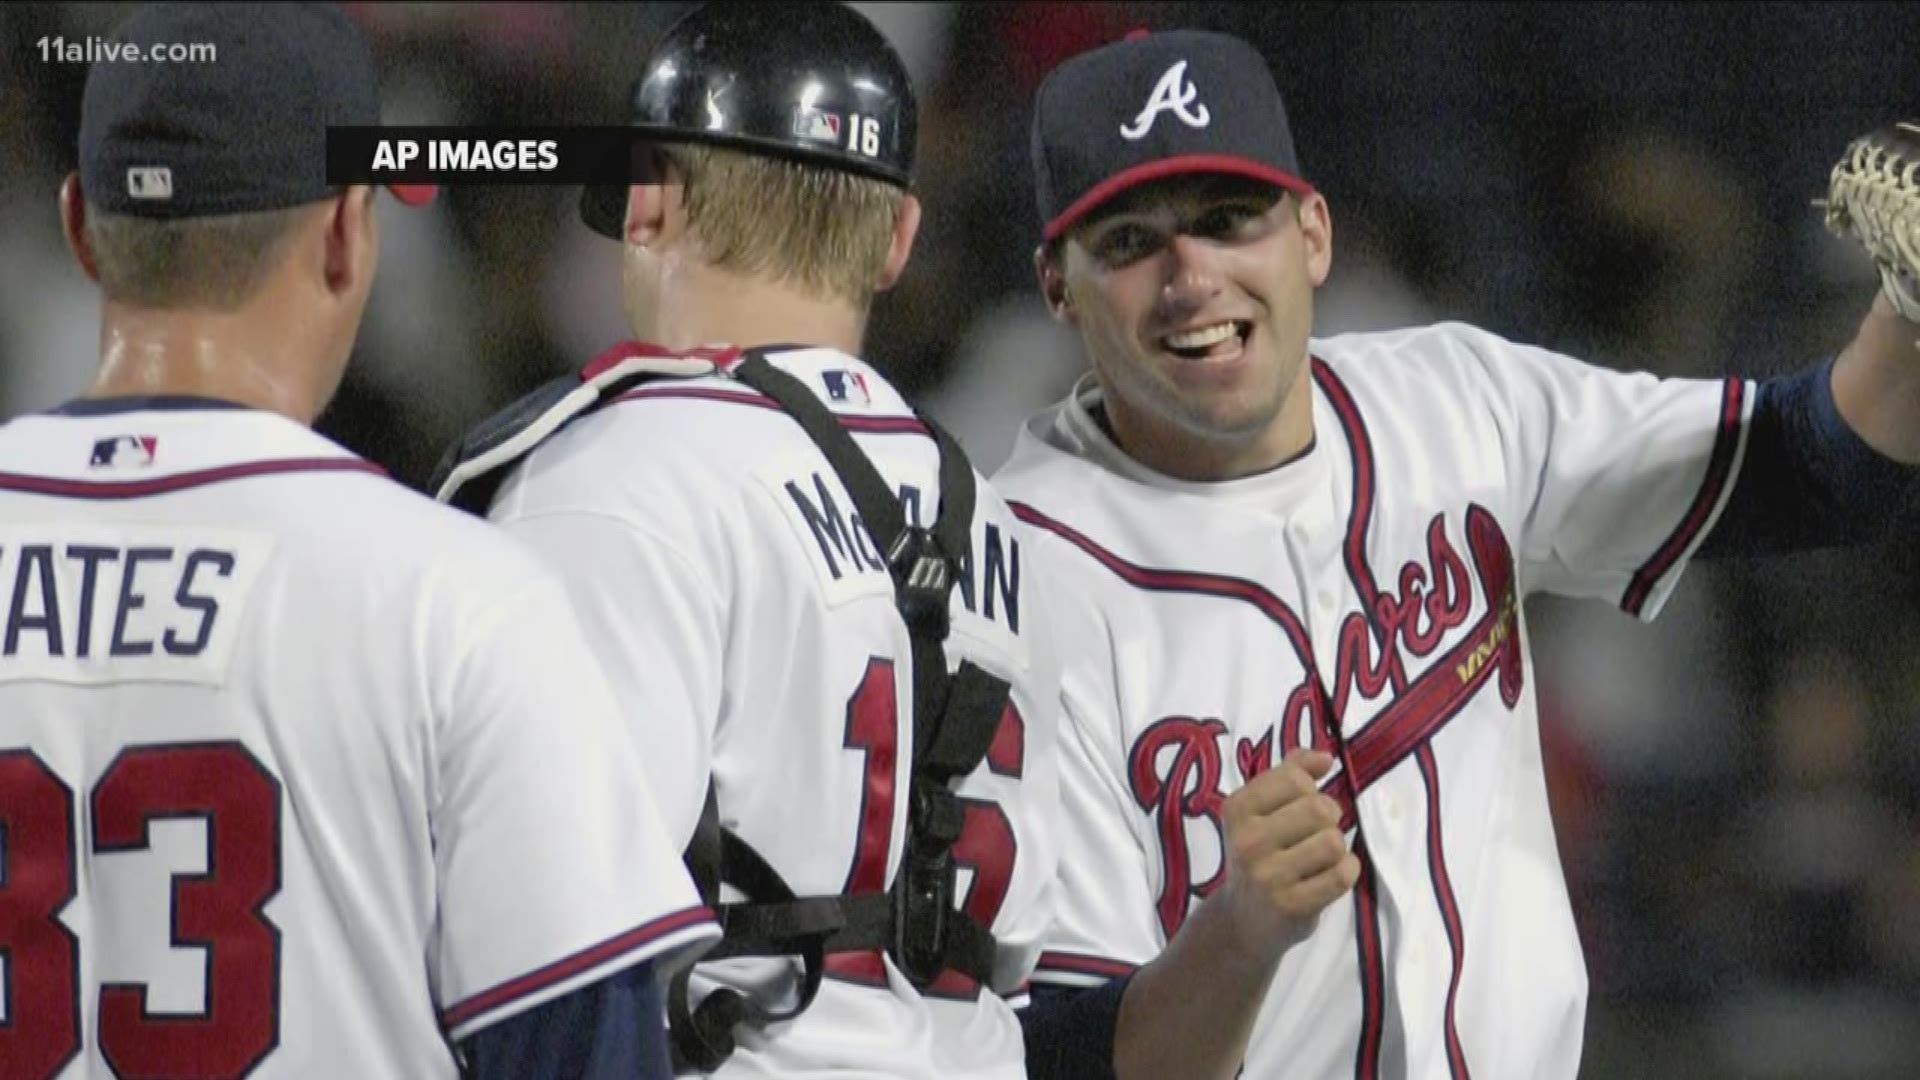 Jeff Francoeur spent some time with the Braves during his playing days.